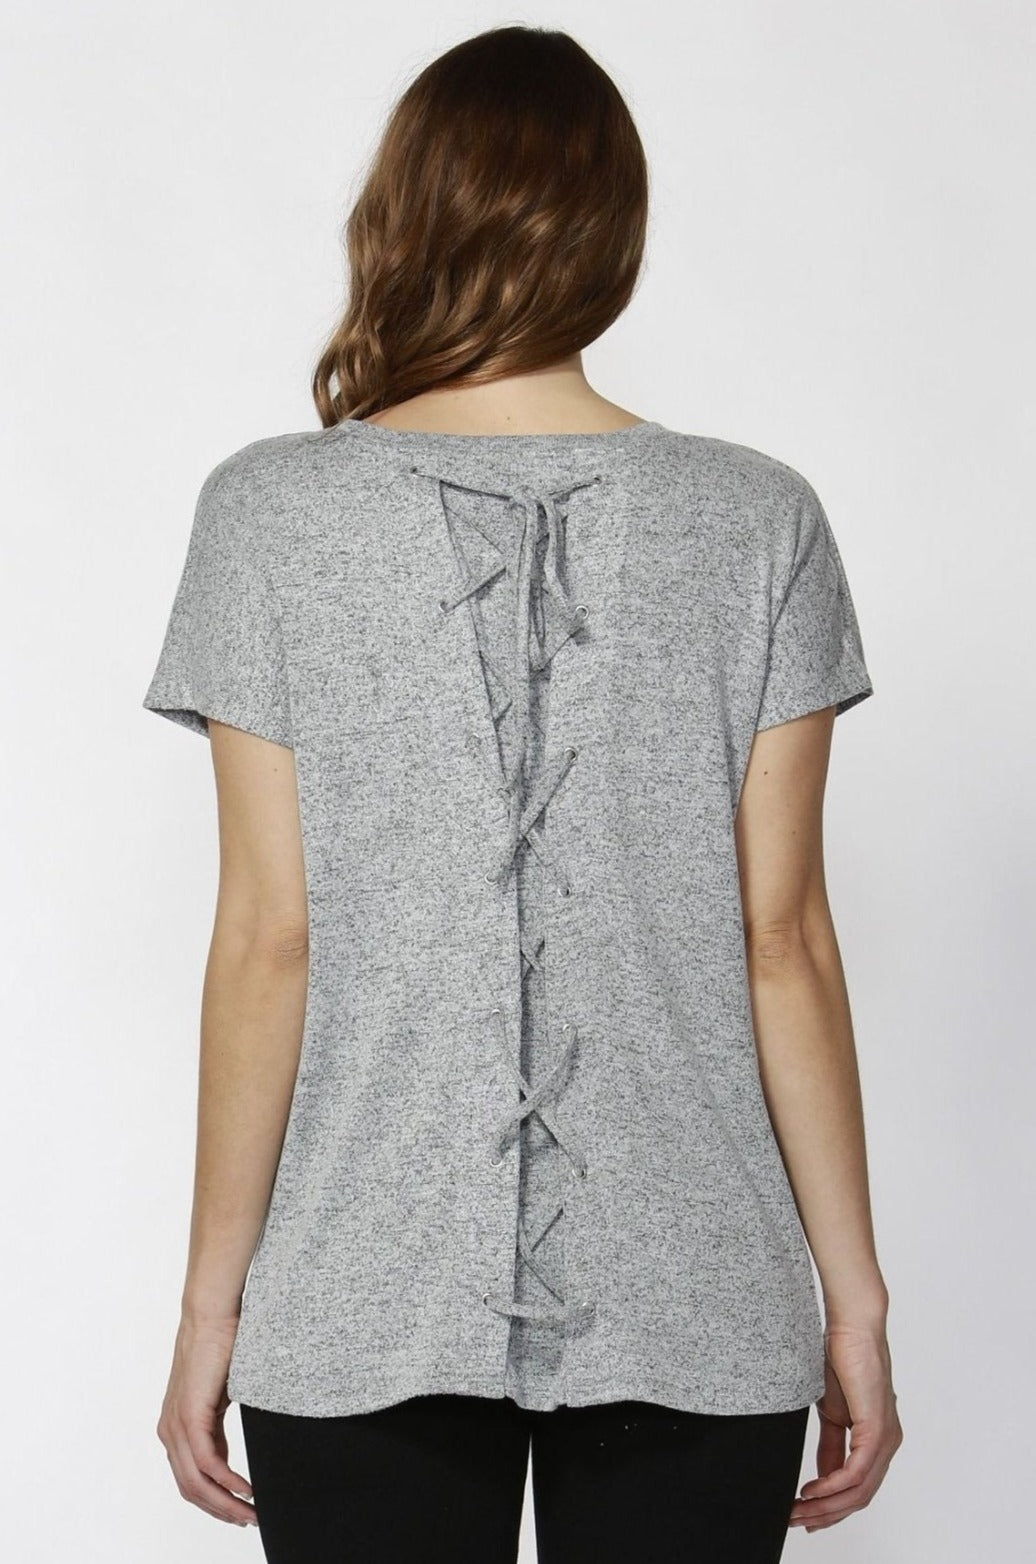 Sass James Adjustable Laced Back Top in Dove Grey - Hey Sara